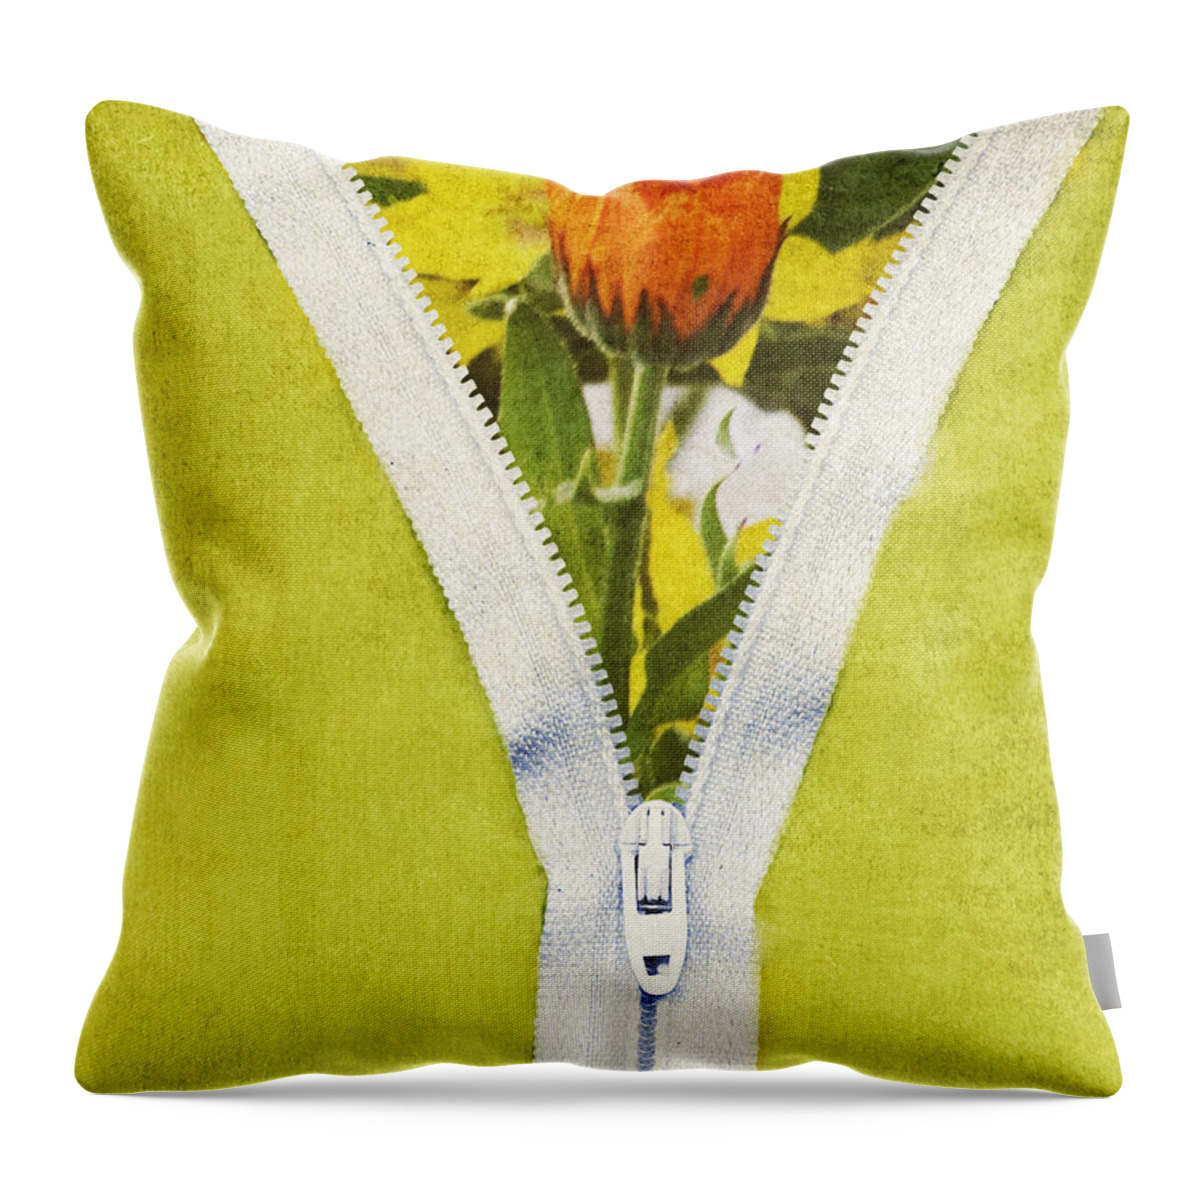 Mixed Media Throw Pillow featuring the photograph Garden Window by Bonnie Bruno